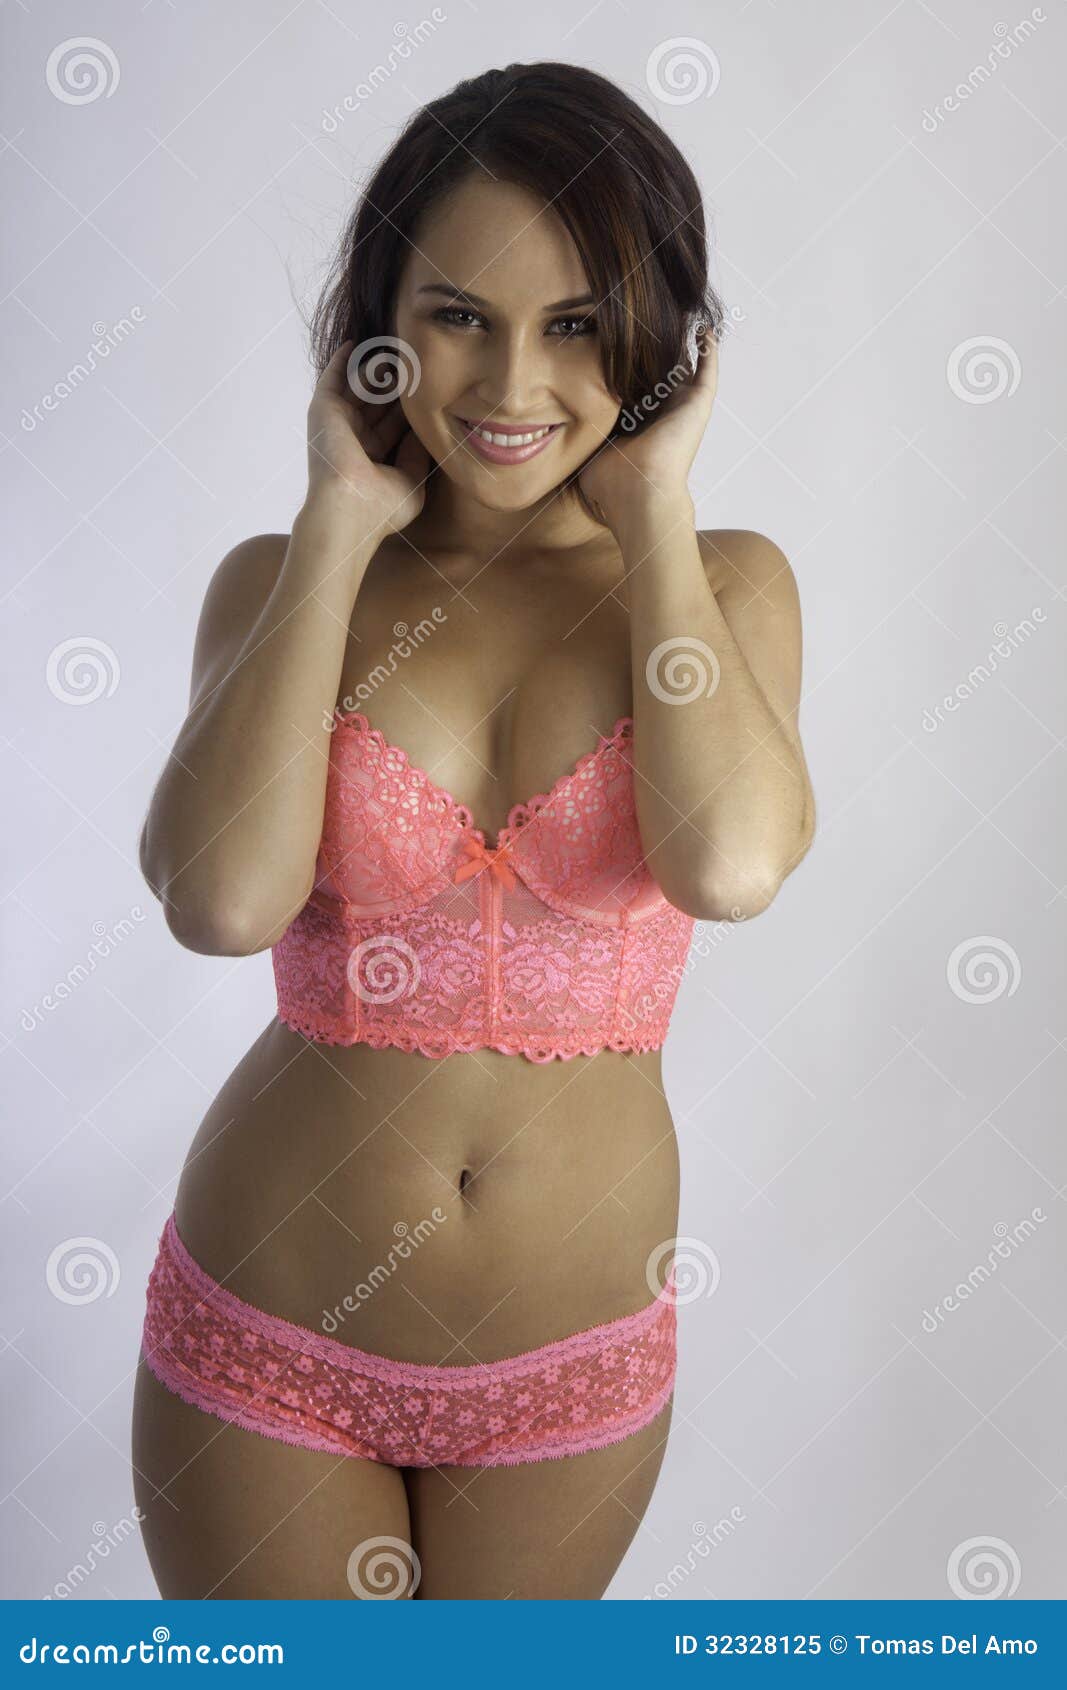 Woman in bra and panties stock image. Image of brunette - 32328125